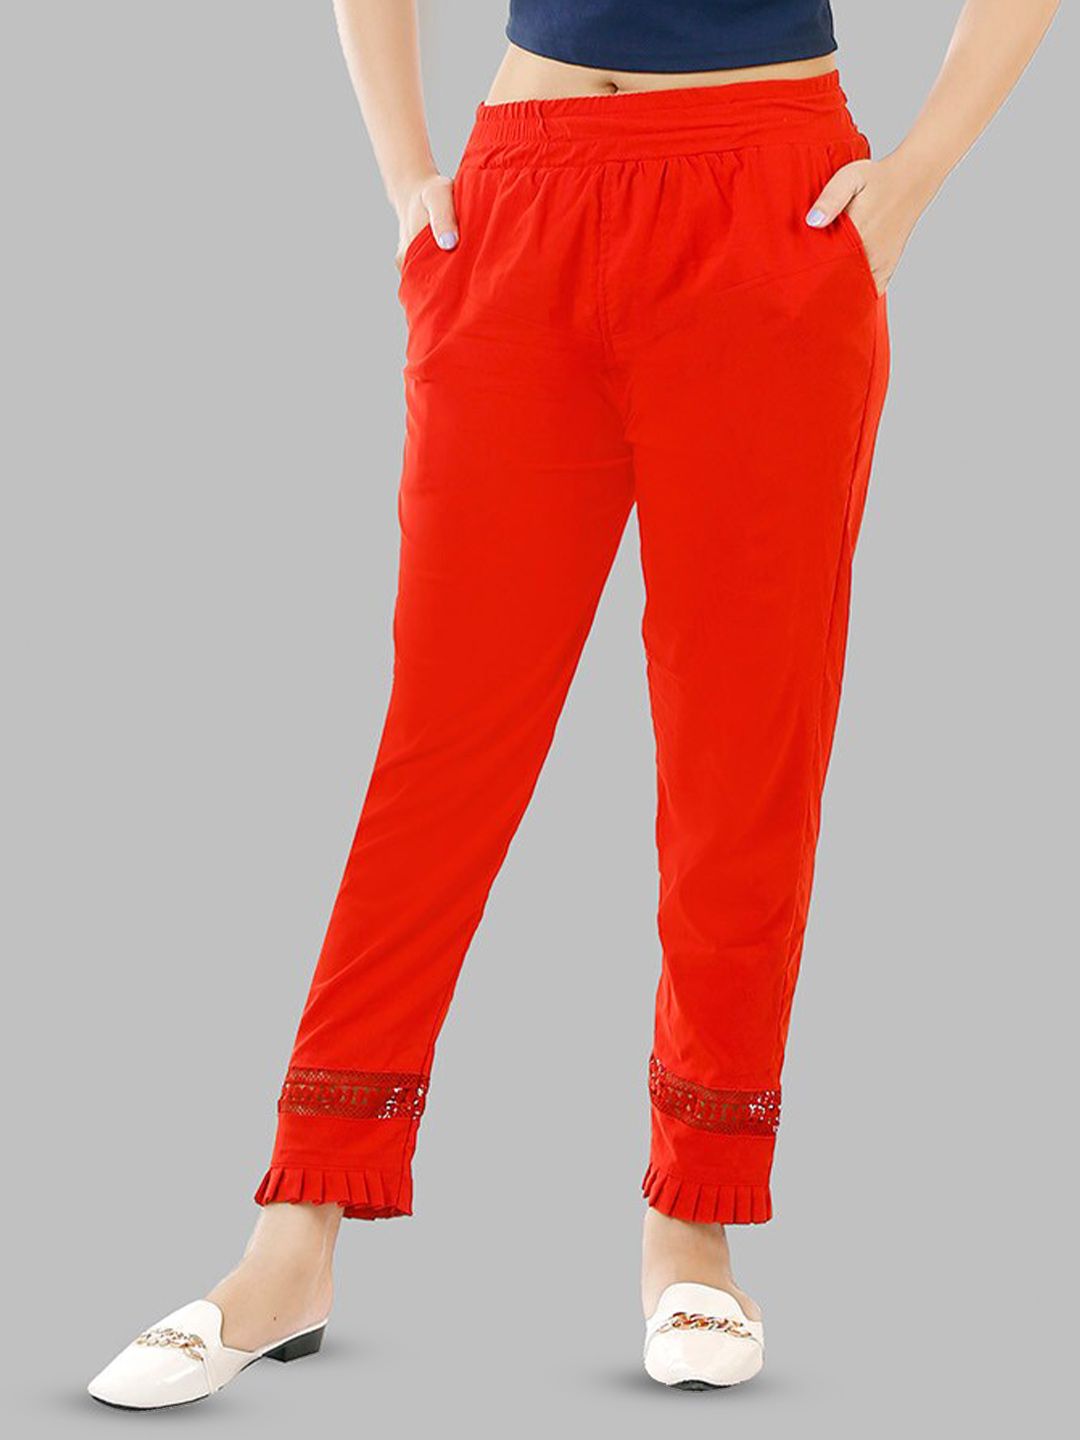 BAESD Women Pencil Slim Fit Mid-Rise Lint Free Cigarette Trouser Price in India